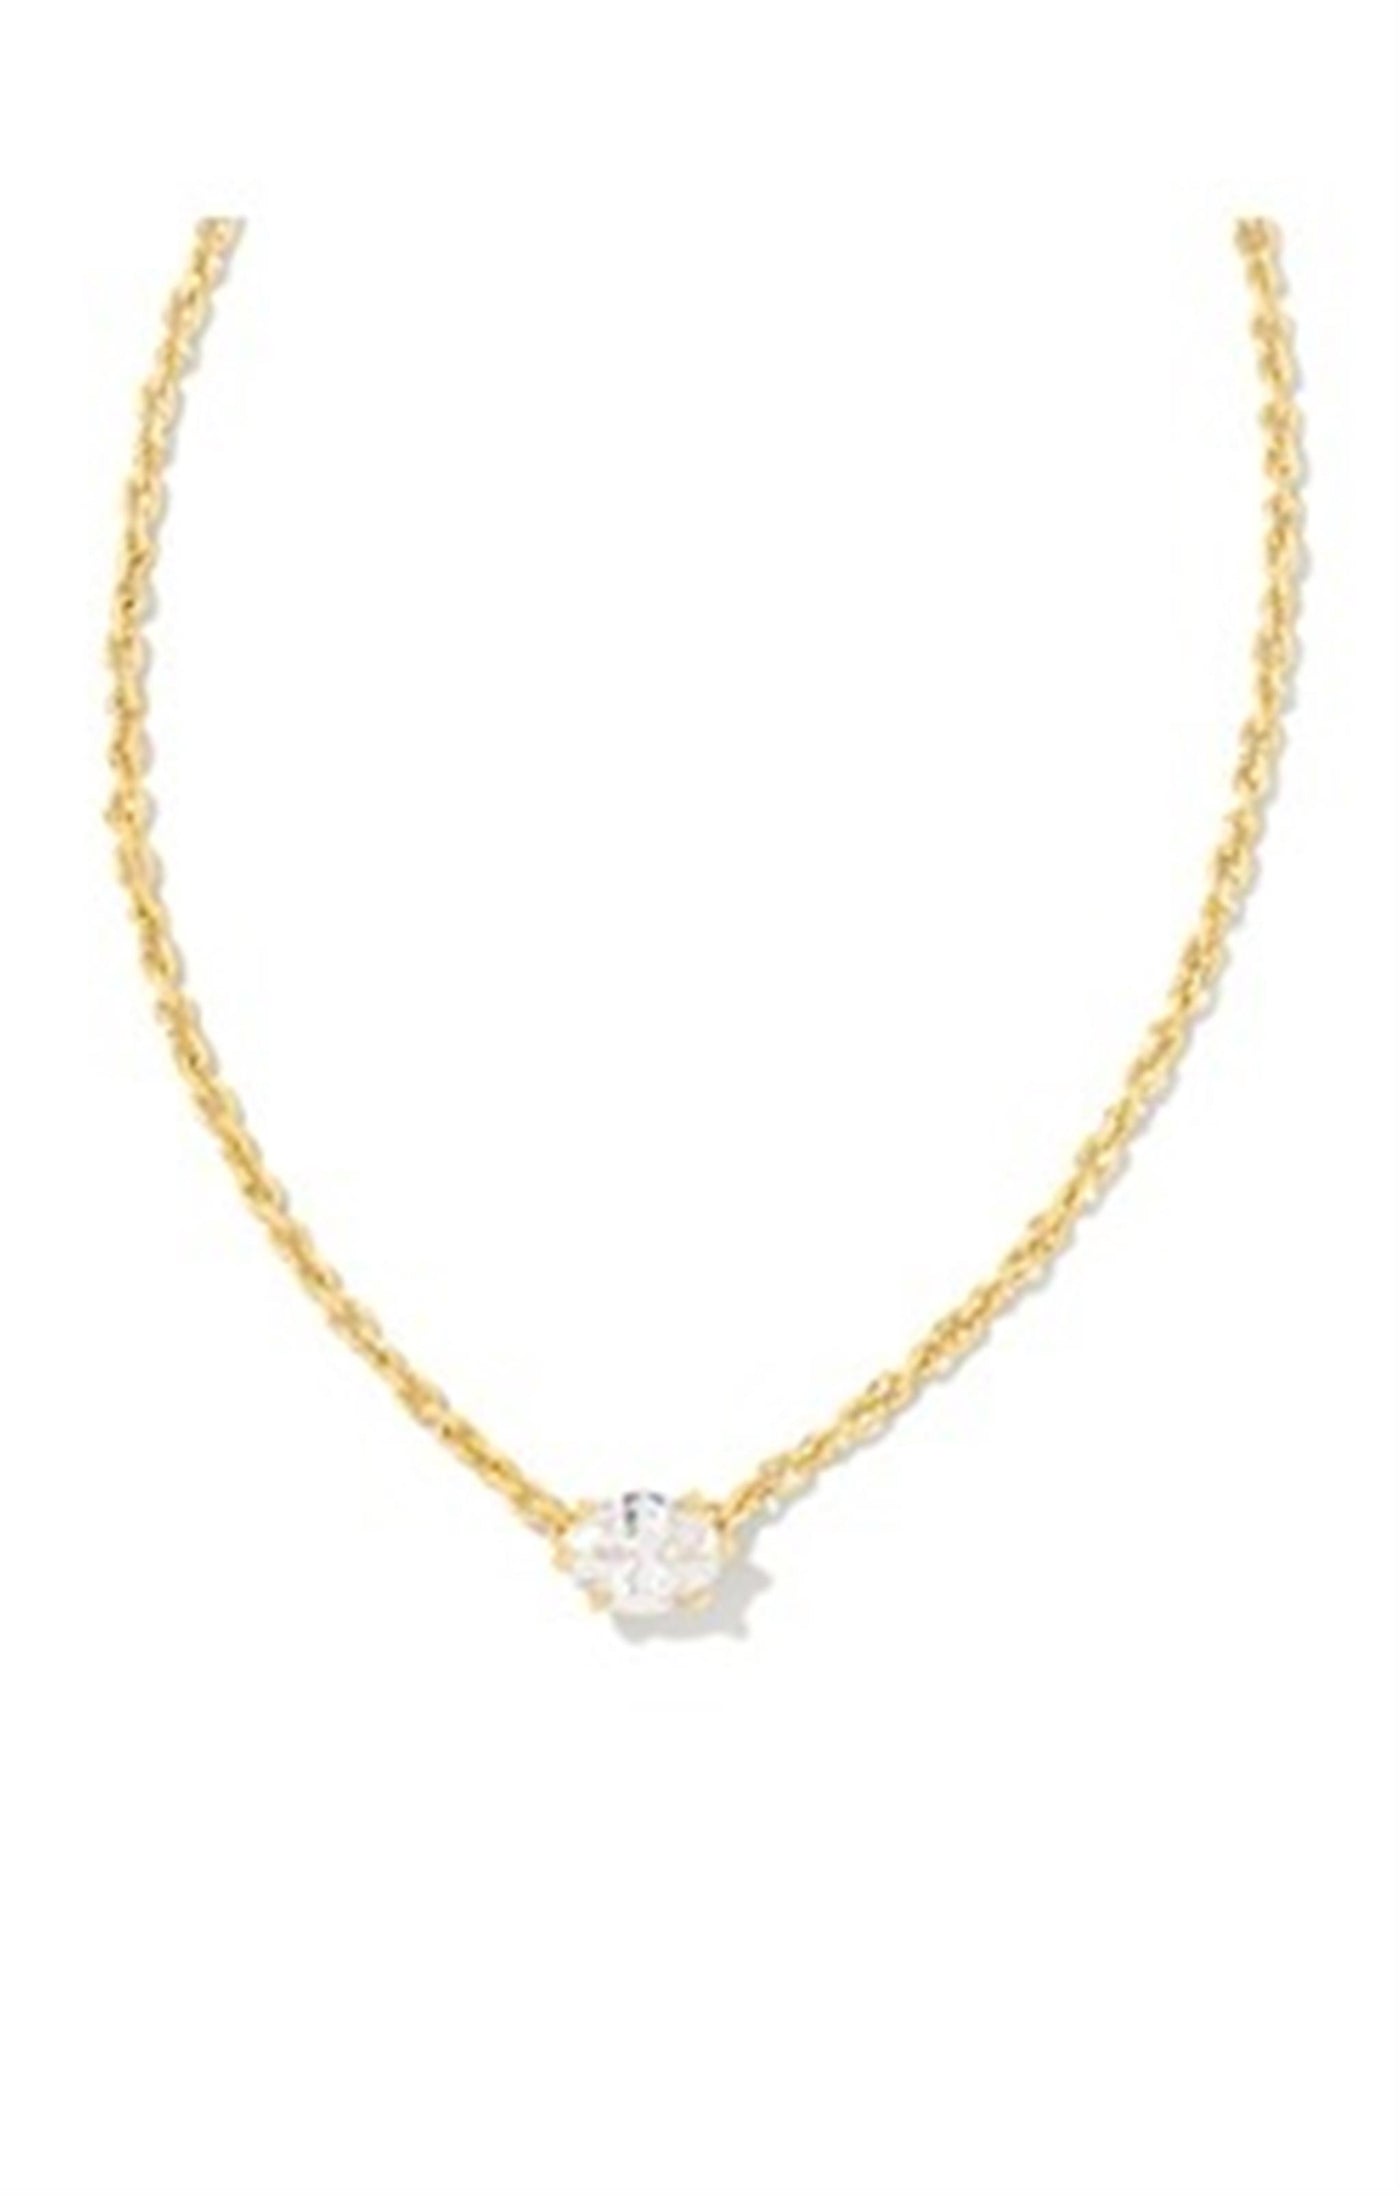 Gold Tone Necklace Featuring White Cubic Zirconium by Kendra Scott